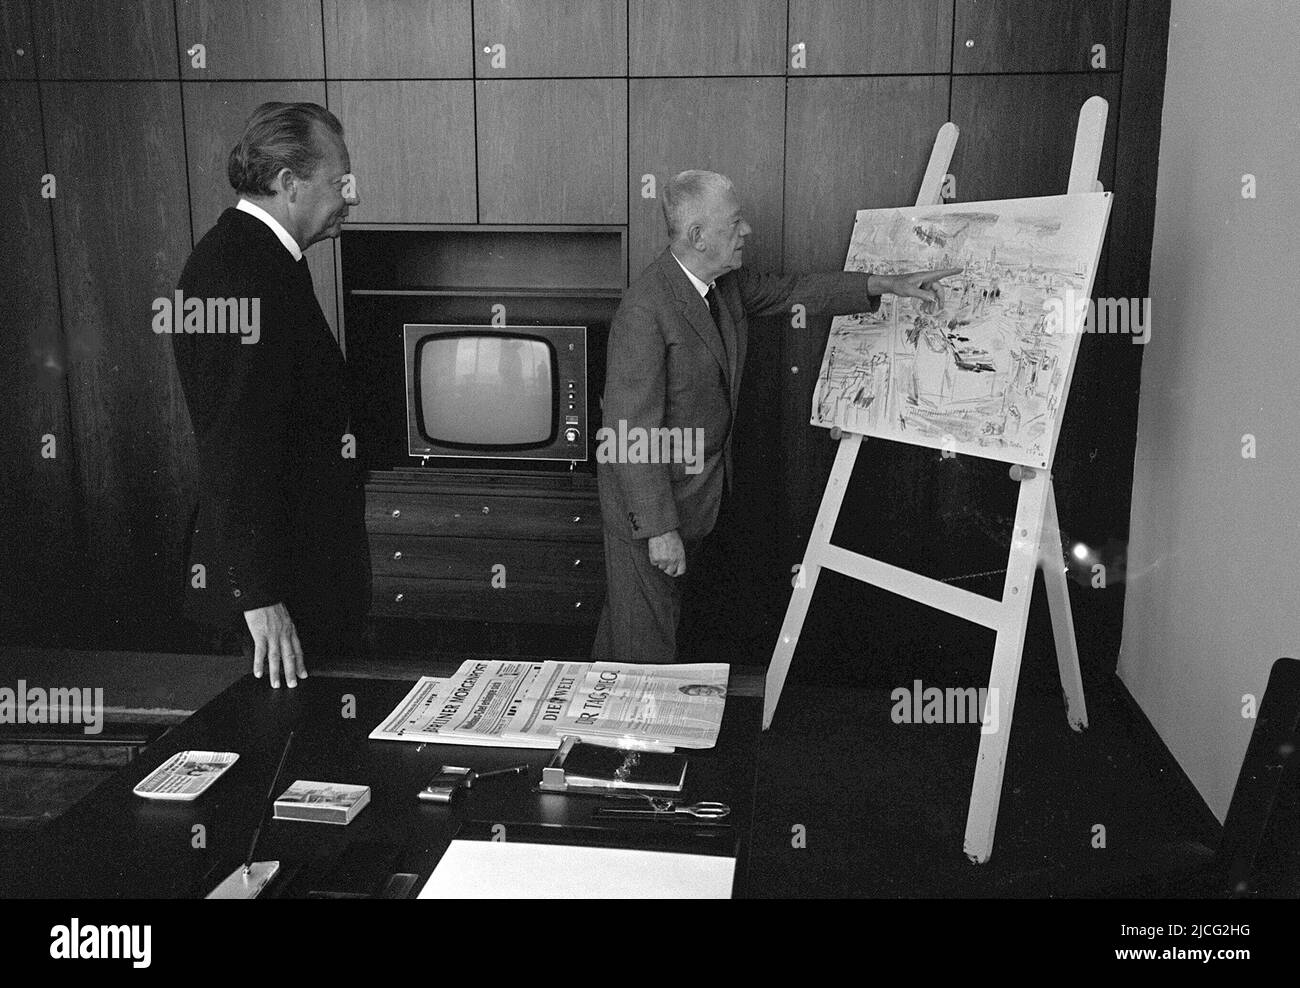 Axel Caesar SPRINGER(left), Germany, publisher, examines with Oskar KOKOSCHKA, Austria, a picture on an easel that Kokoschka painted, landscape format; black and white shot; Stock Photo